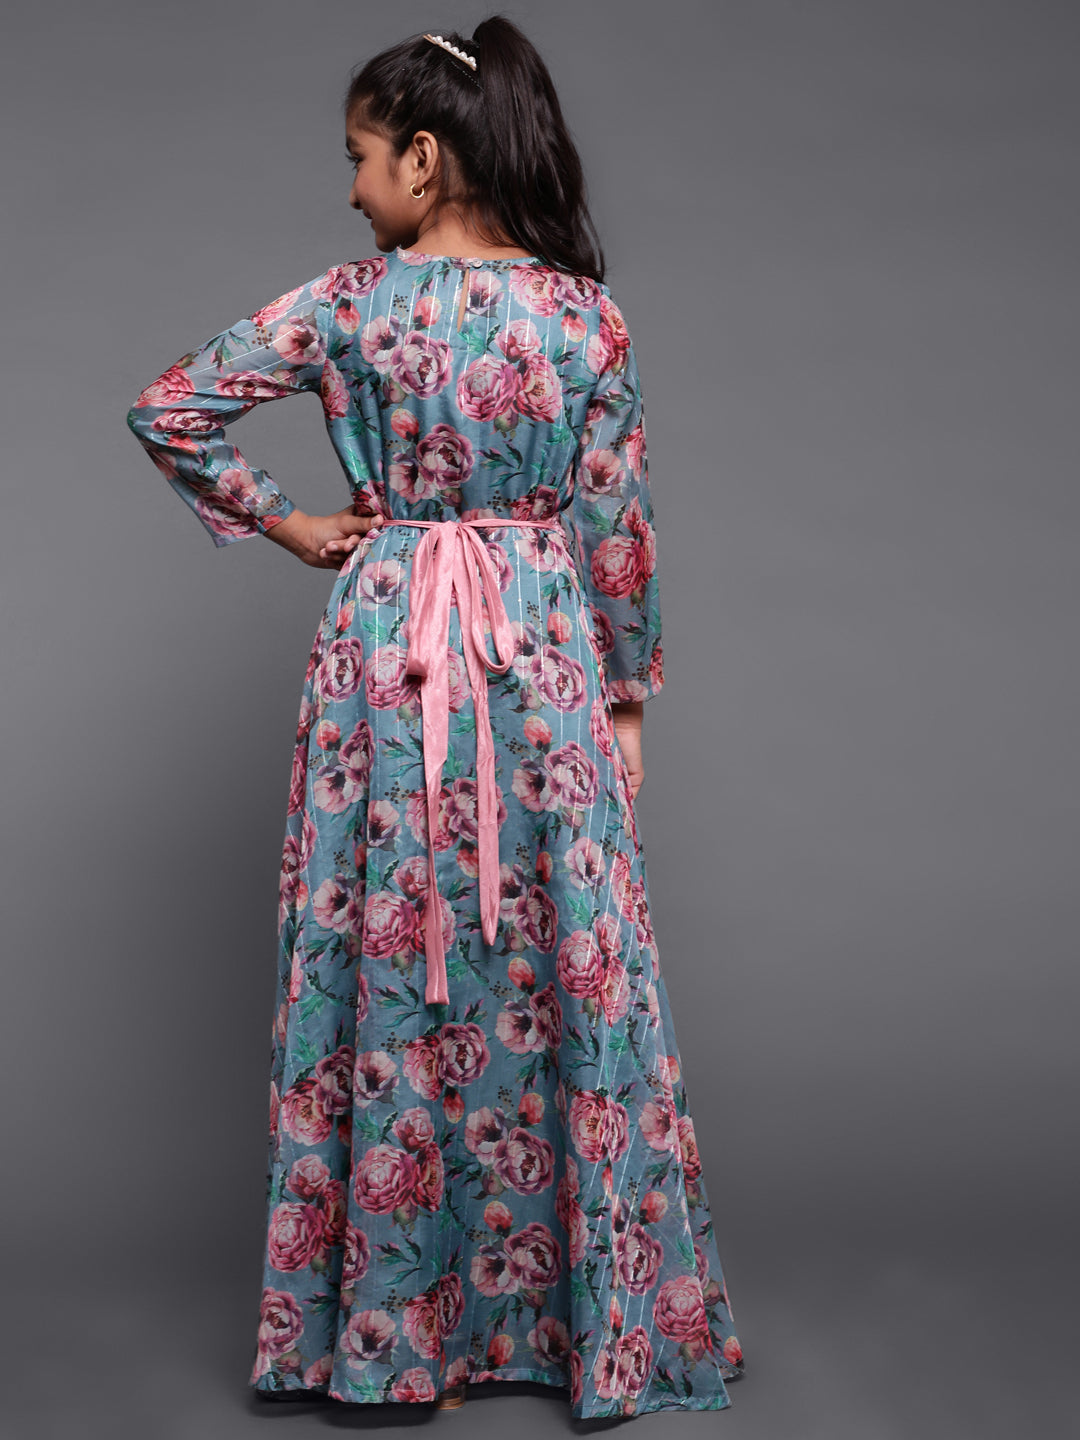 Blue Floral Print Flared Maxi With Mirror Work Belt